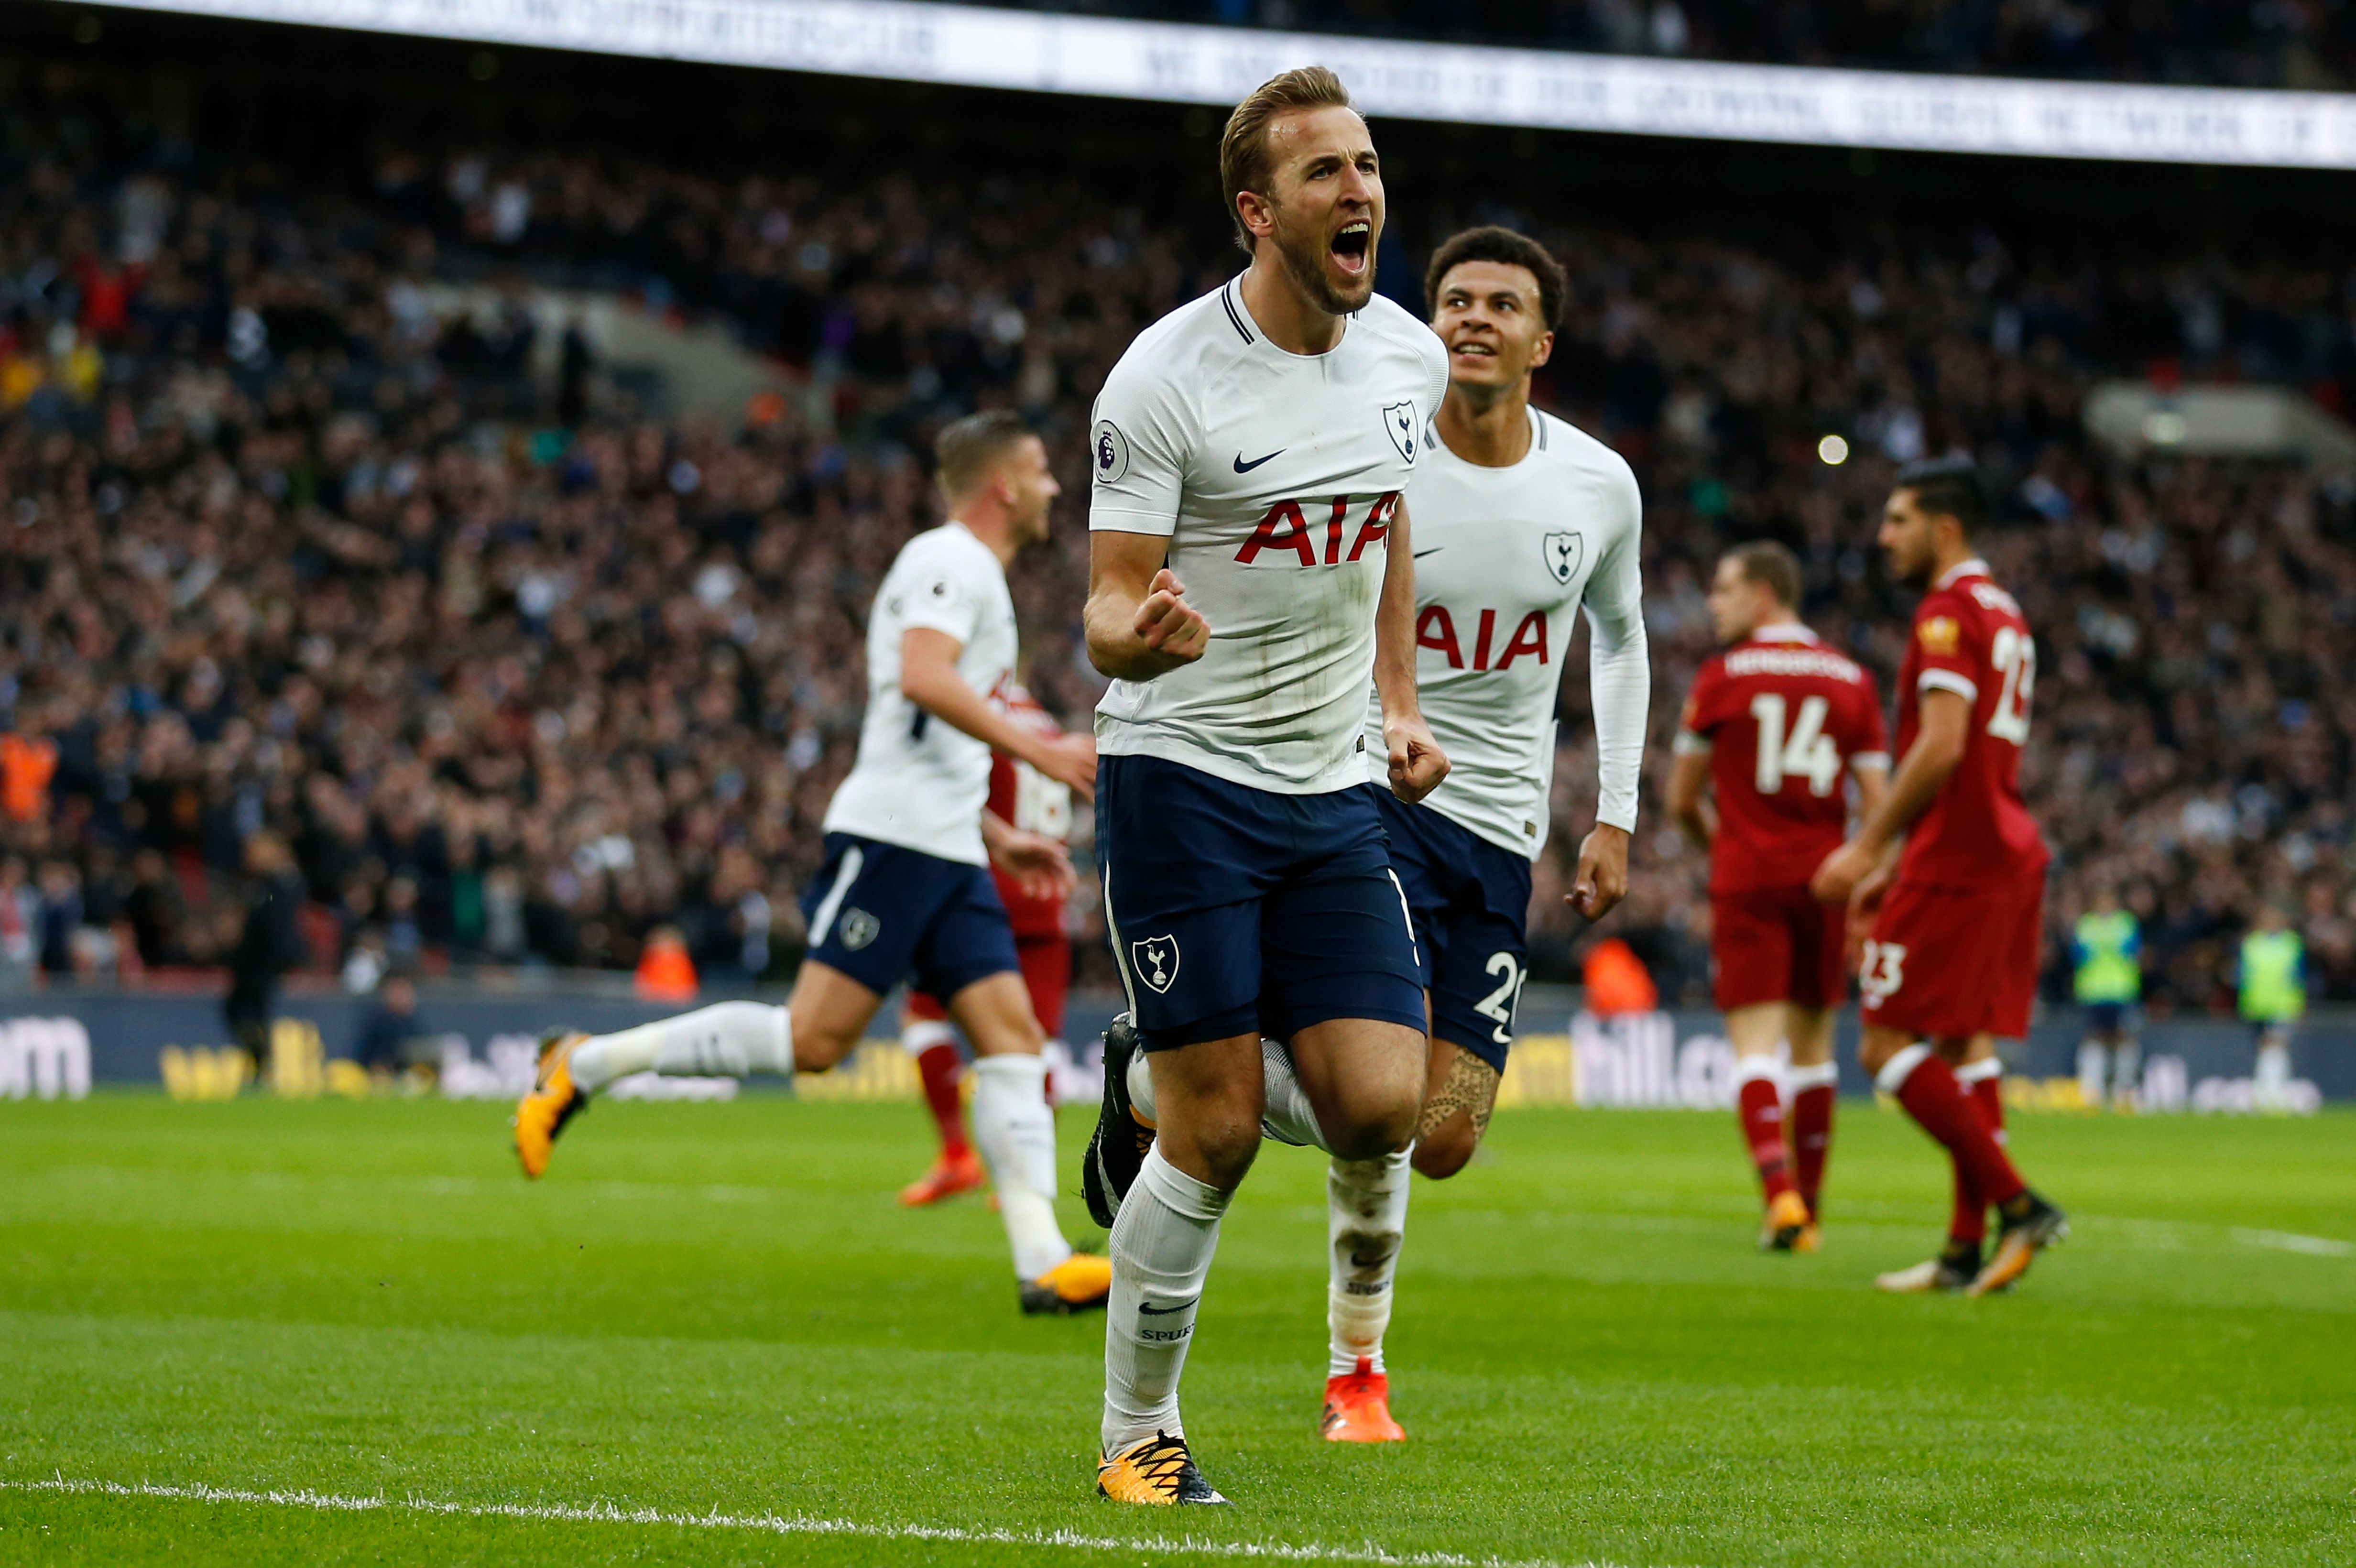 Tottenham Hotspur's English striker Harry Kane (C) celebrates after scoring their fourth goal during the English Premier League football match between Tottenham Hotspur and Liverpool at Wembley Stadium in London, on October 22, 2017. / AFP PHOTO / IKIMAGES / Ian KINGTON / RESTRICTED TO EDITORIAL USE. No use with unauthorized audio, video, data, fixture lists, club/league logos or 'live' services. Online in-match use limited to 45 images, no video emulation. No use in betting, games or single club/league/player publications.  /         (Photo credit should read IAN KINGTON/AFP/Getty Images)